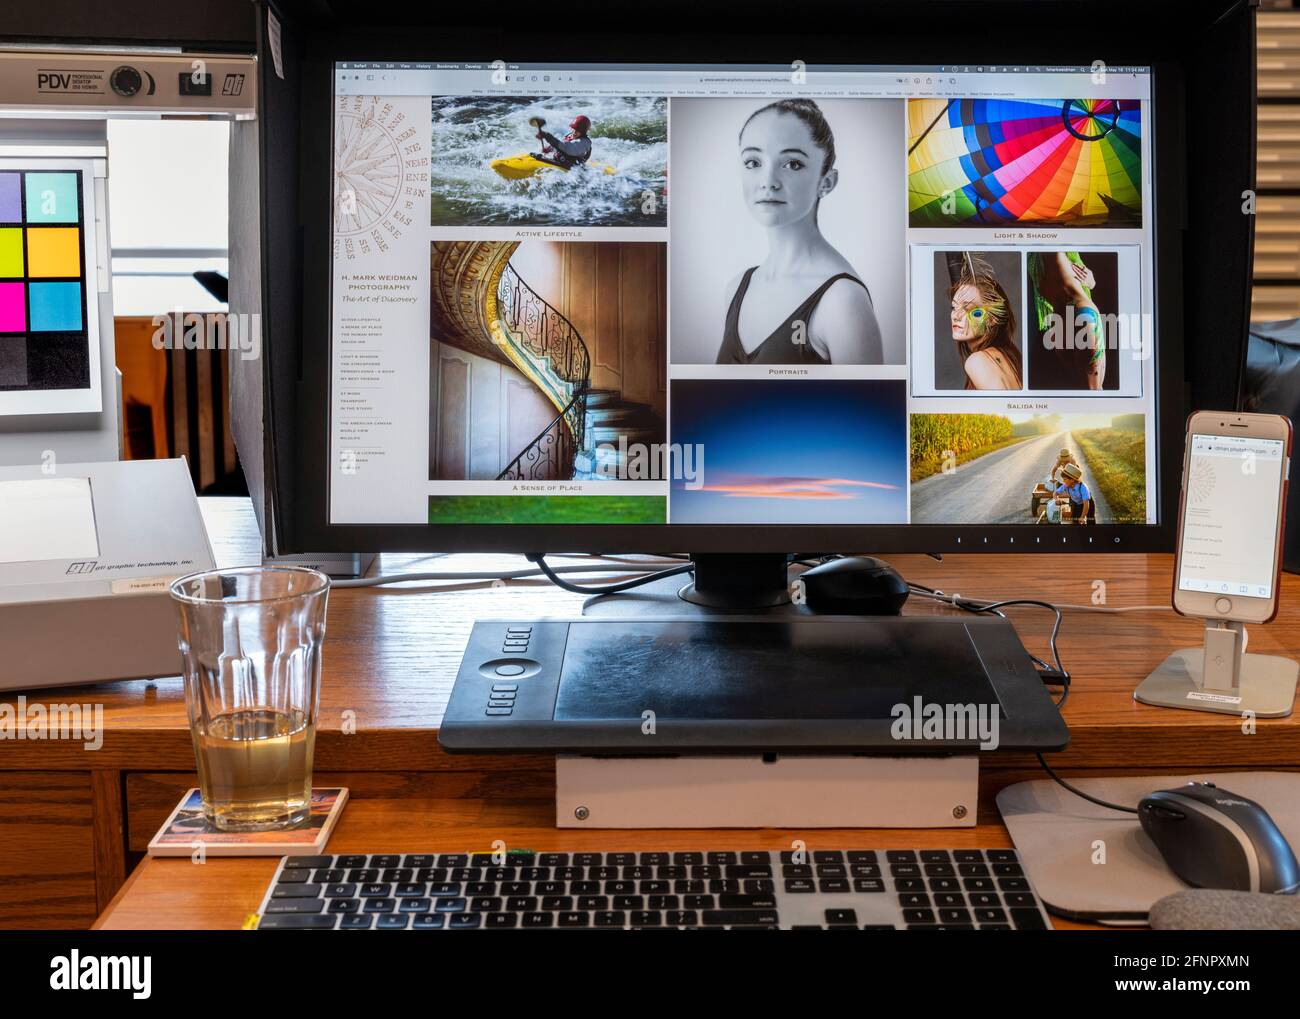 H. Mark Weidman Photography web site displayed on a large computer monitor Stock Photo